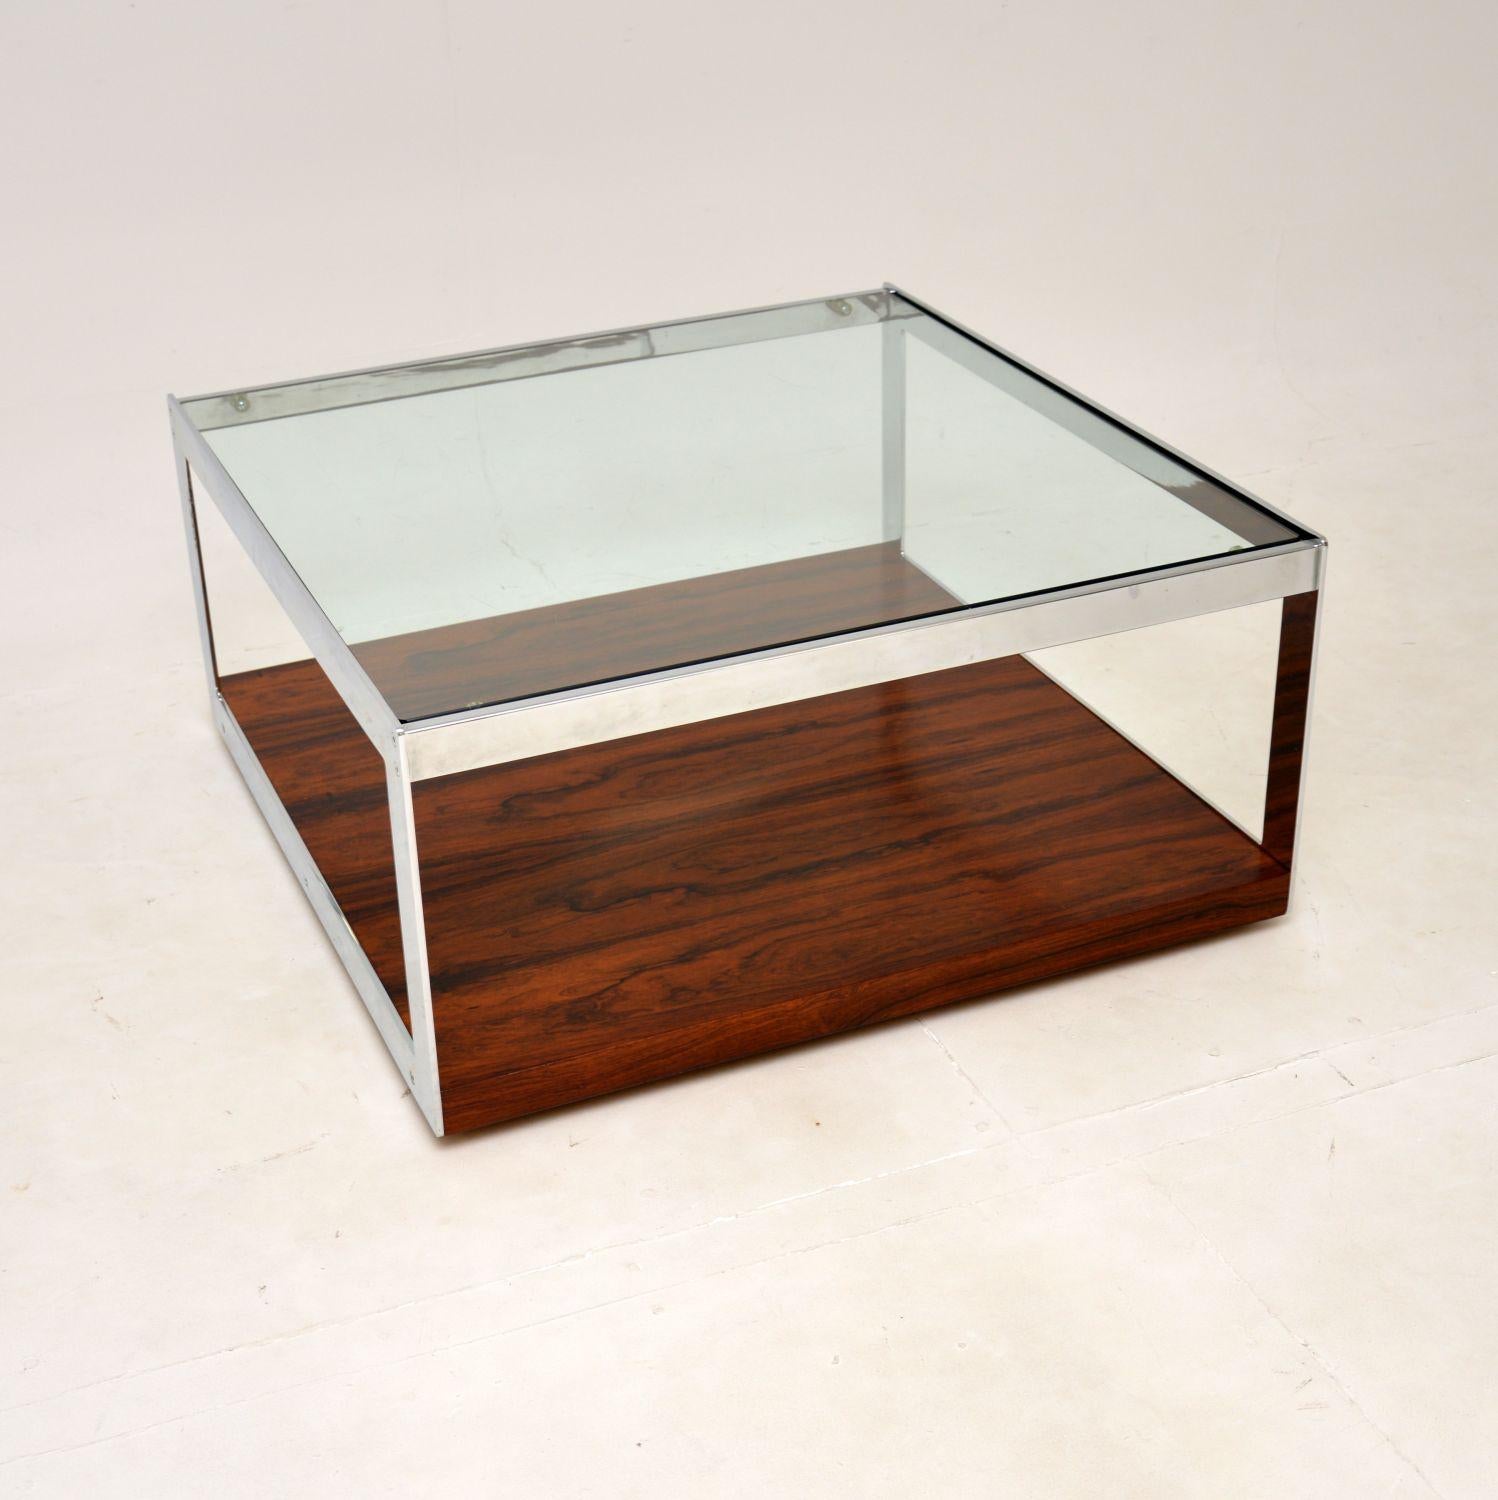 A very stylish and iconic vintage coffee table by Merrow Associates. This was made in England, it was designed by Richard Young and it dates from the early 1970’s.

The quality is superb, this is a great size with a useful lower tier for storage.